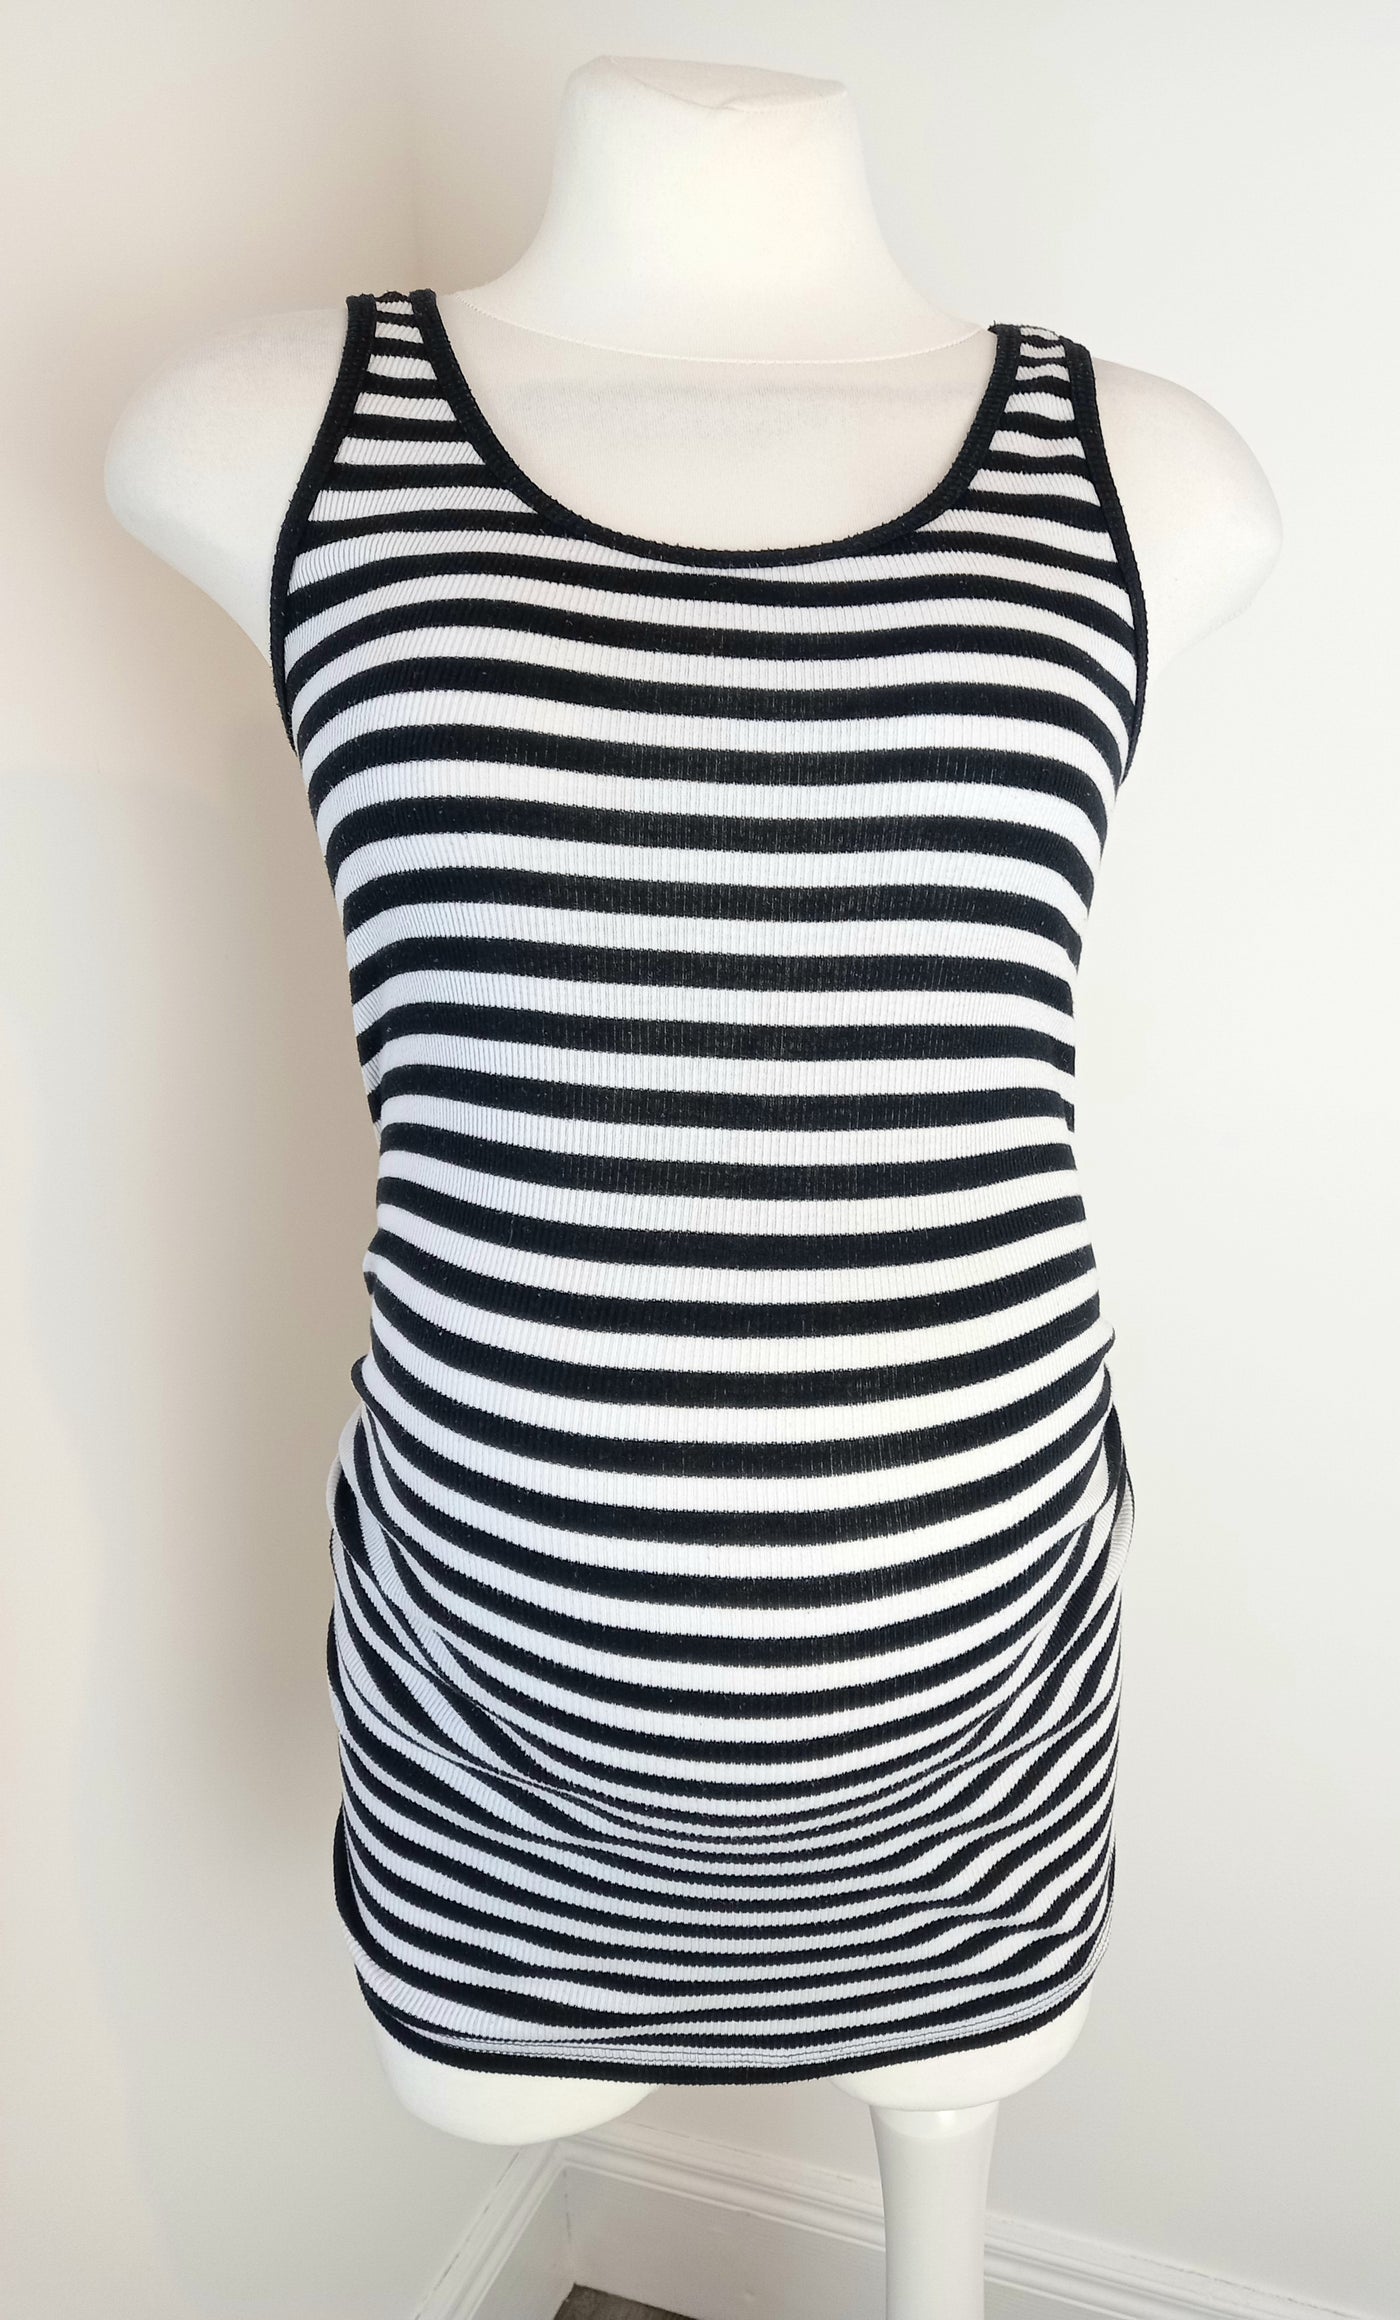 New Look Maternity black & white striped sleeveless top - Size 10